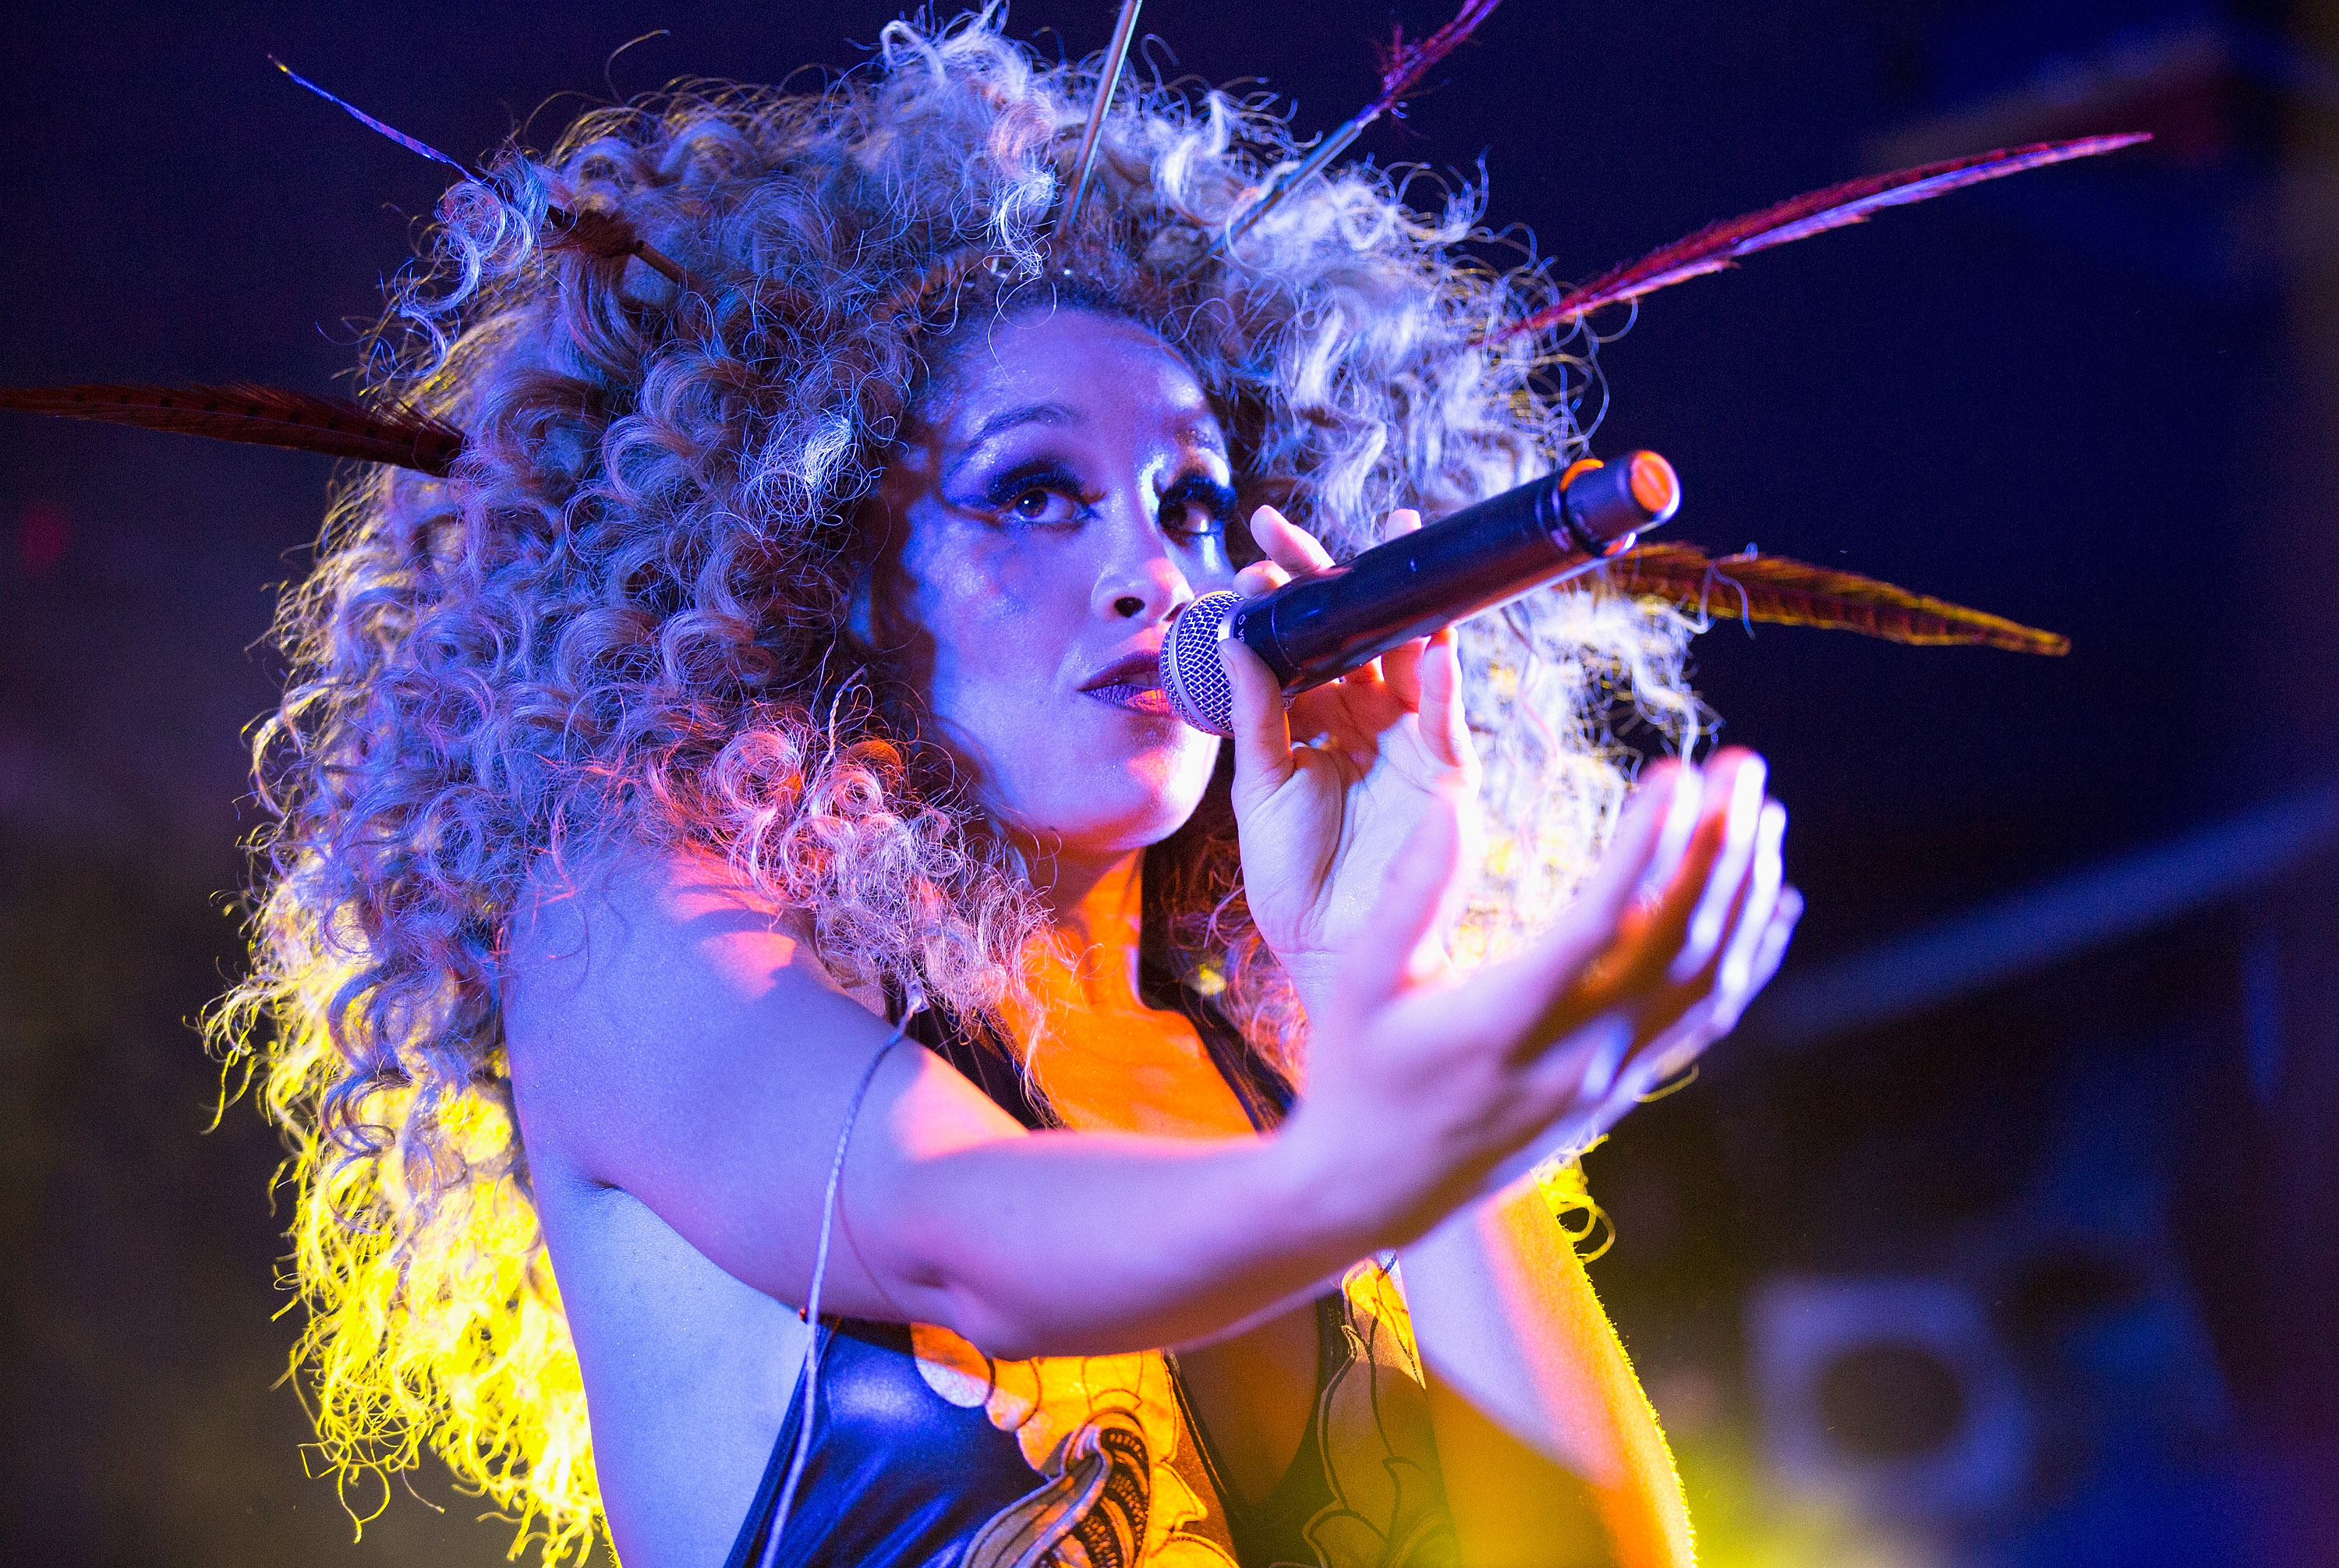 Lion Babe in concert